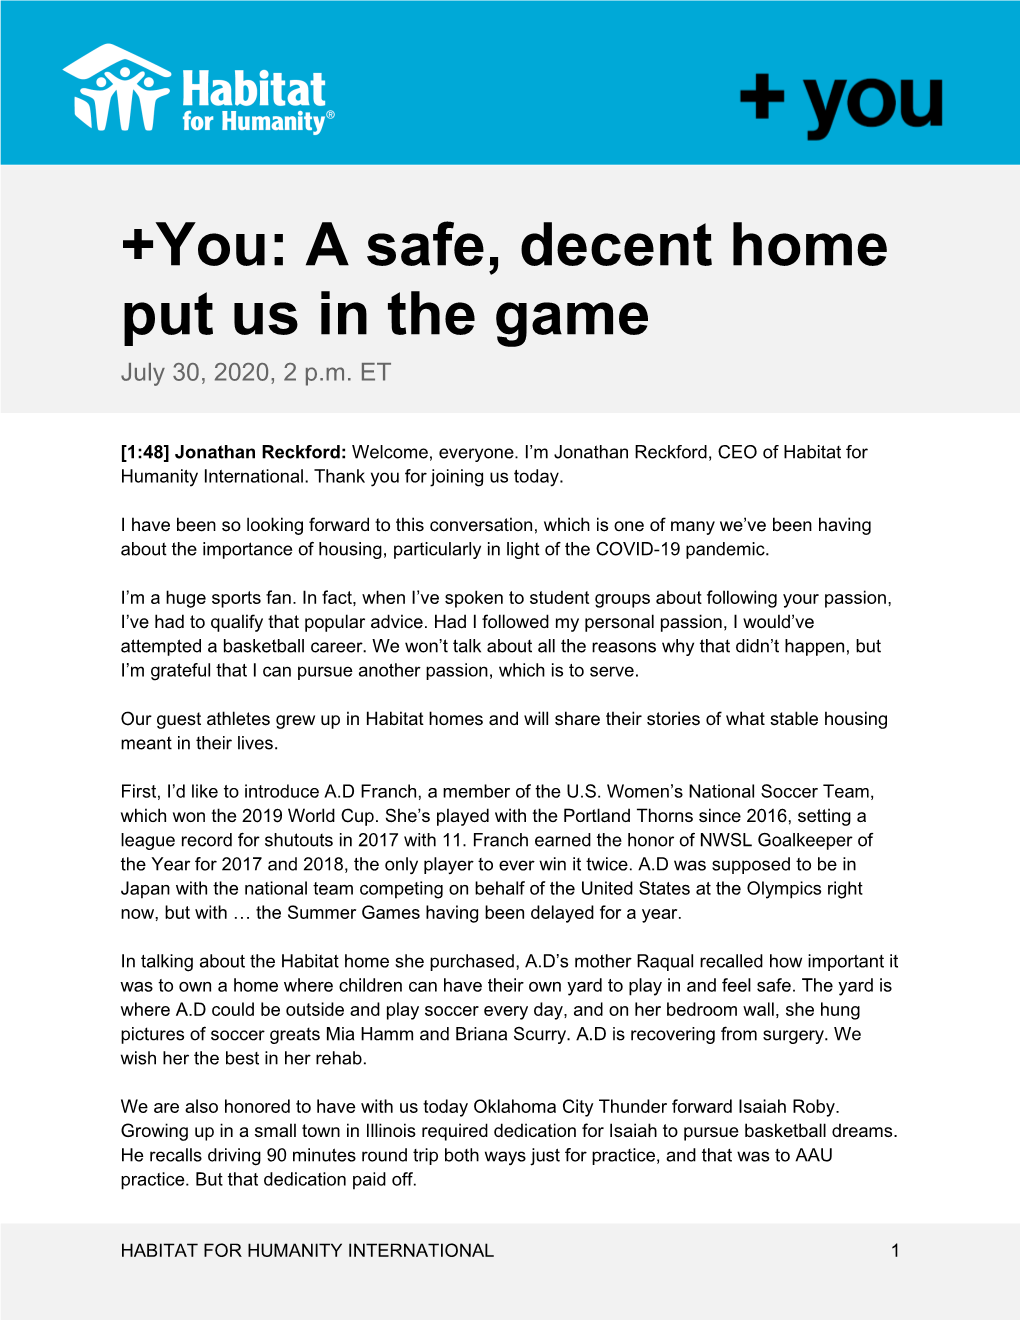 +You: a Safe, Decent Home Put Us in the Game July 30, 2020, 2 P.M